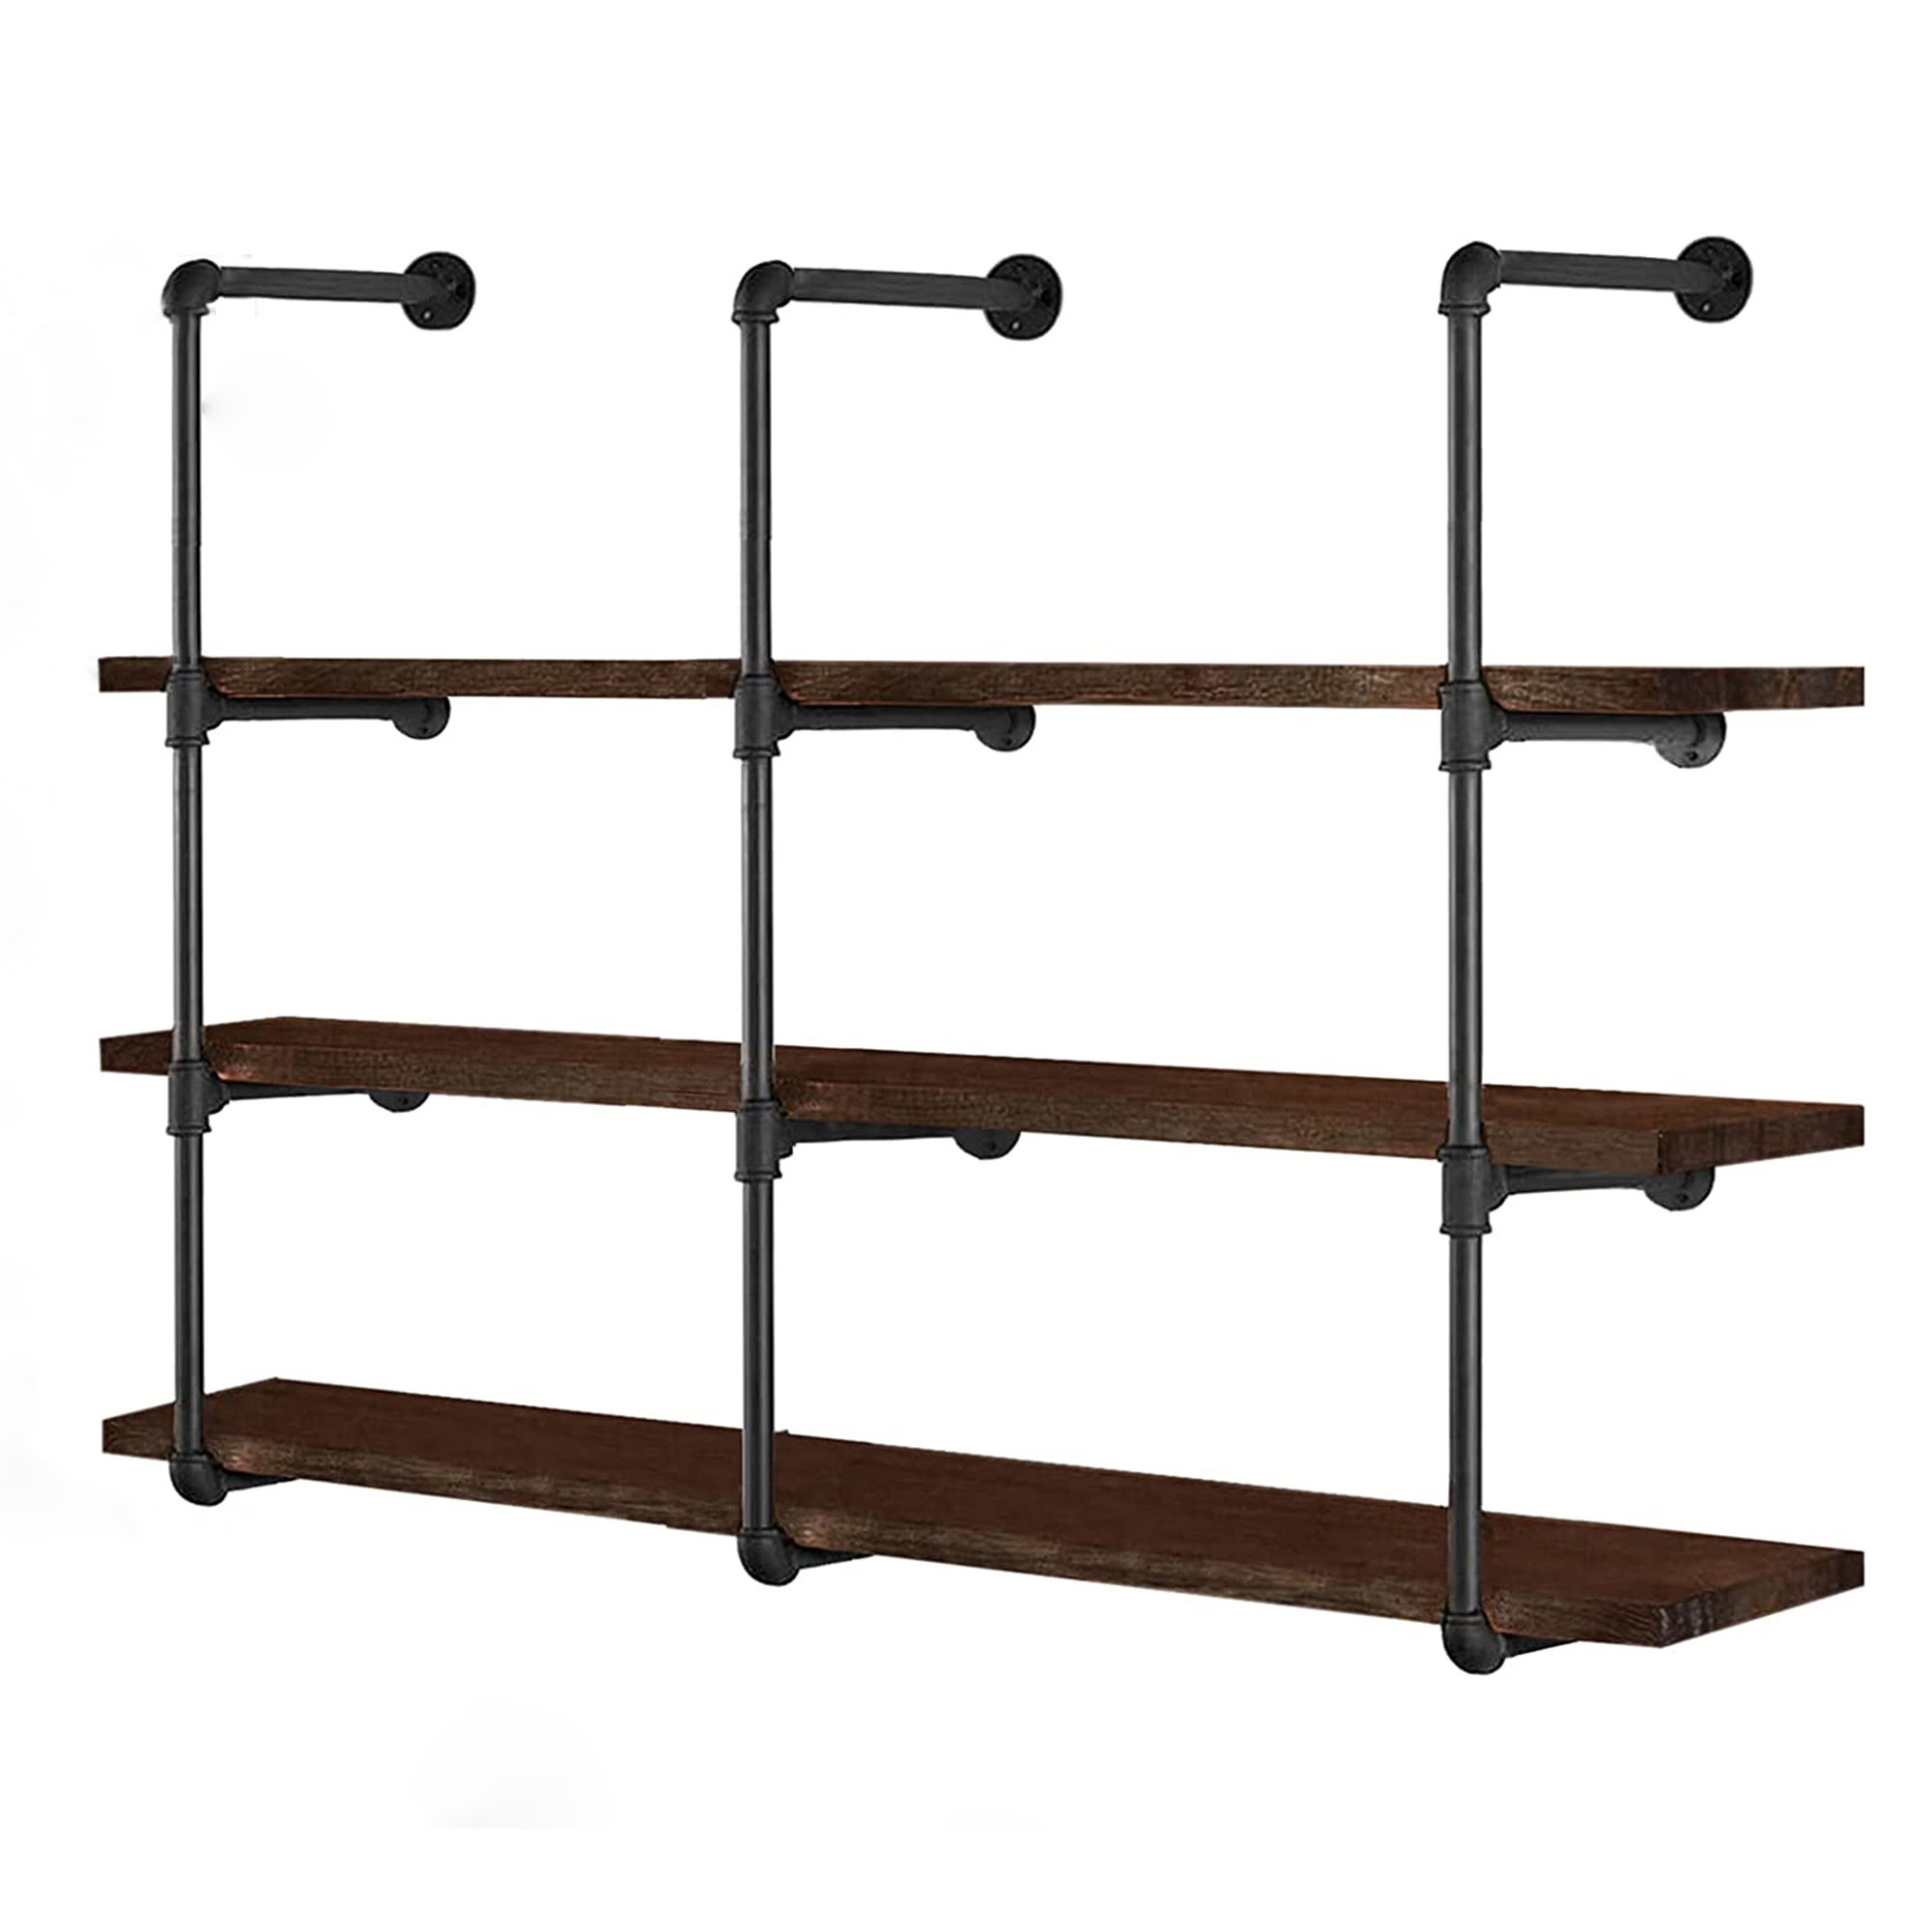 & Friedeborn & Metal Wayfair Williston Reviews (Wood Included) Planks Black Style Iron 3-Tiered Forge Flanges Not Pipe Shelf | D.I.Y